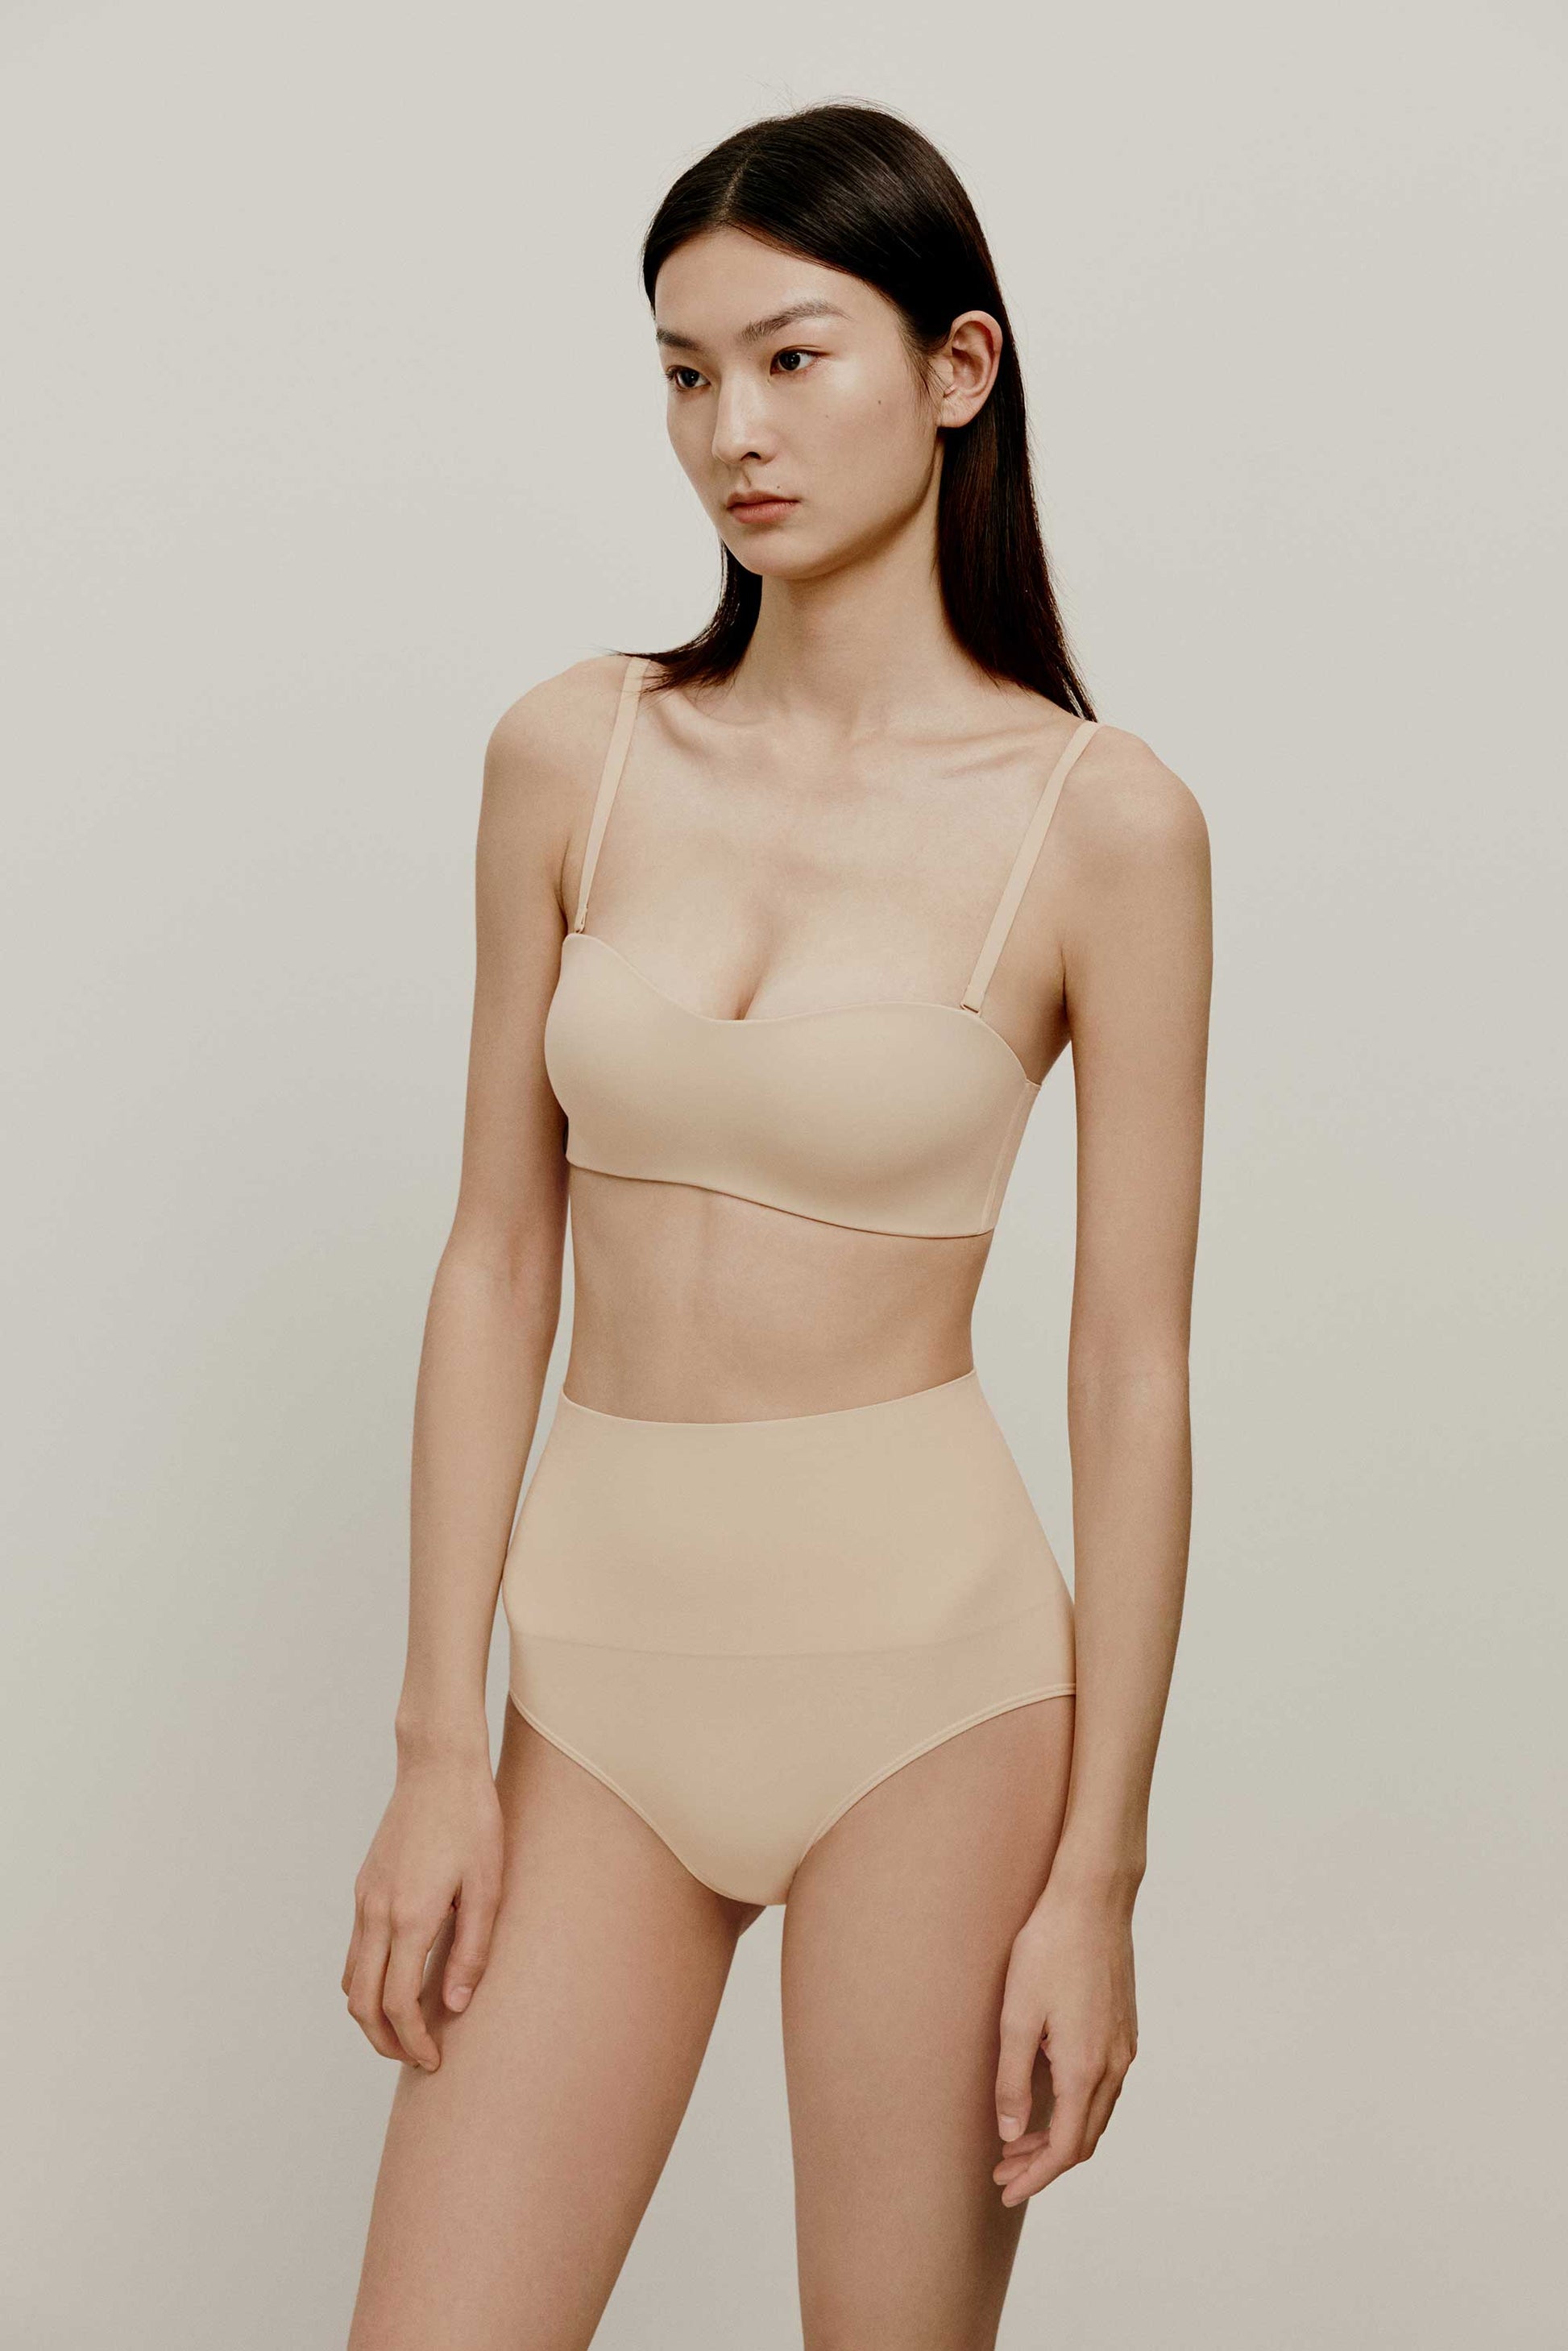 Cavotor Strapless Bra Padded Bandeau Bra Stay Up Non-Slip Silicone  Supportive Seamless Wirefree Stretchy Comfort Wrapped Bralette (Beige,S) :  : Fashion